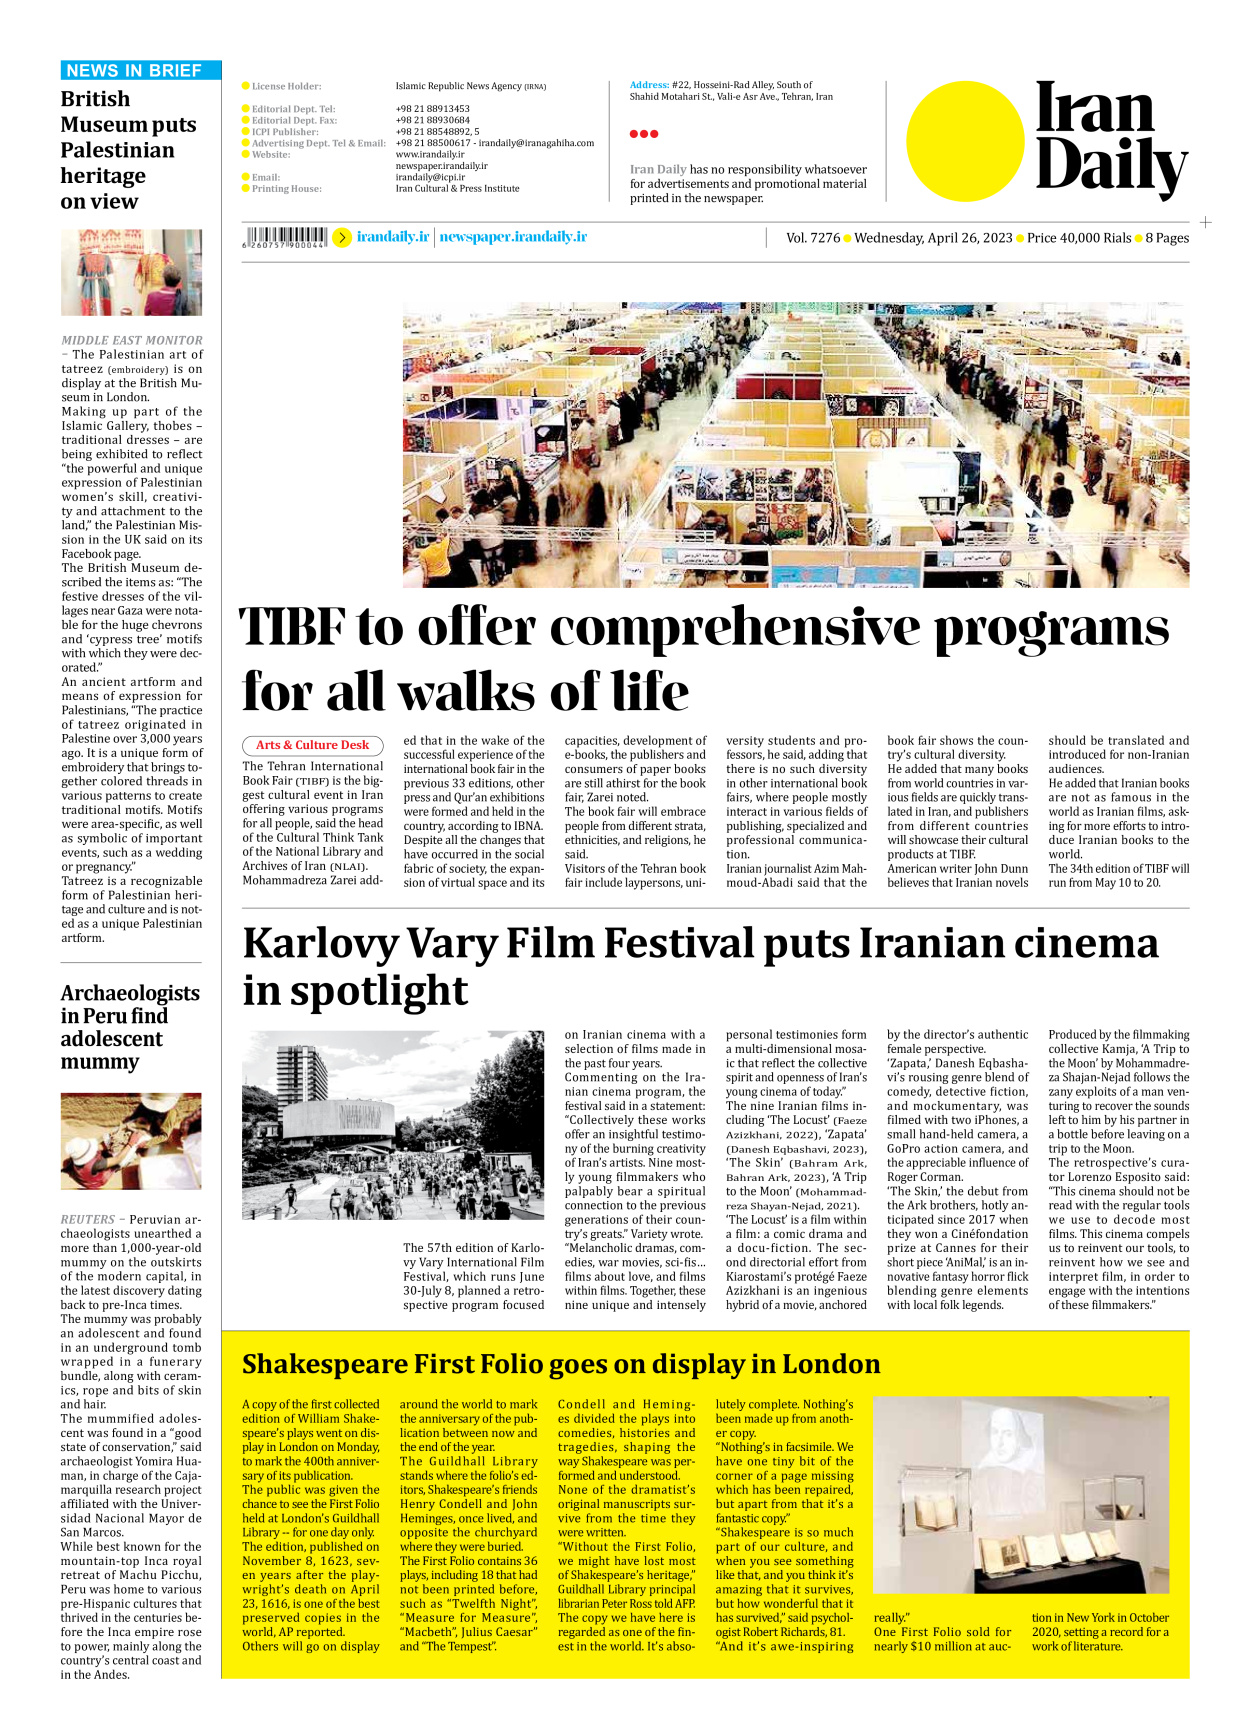 Iran Daily - Number Seven Thousand Two Hundred and Seventy Six - 26 April 2023 - Page 8